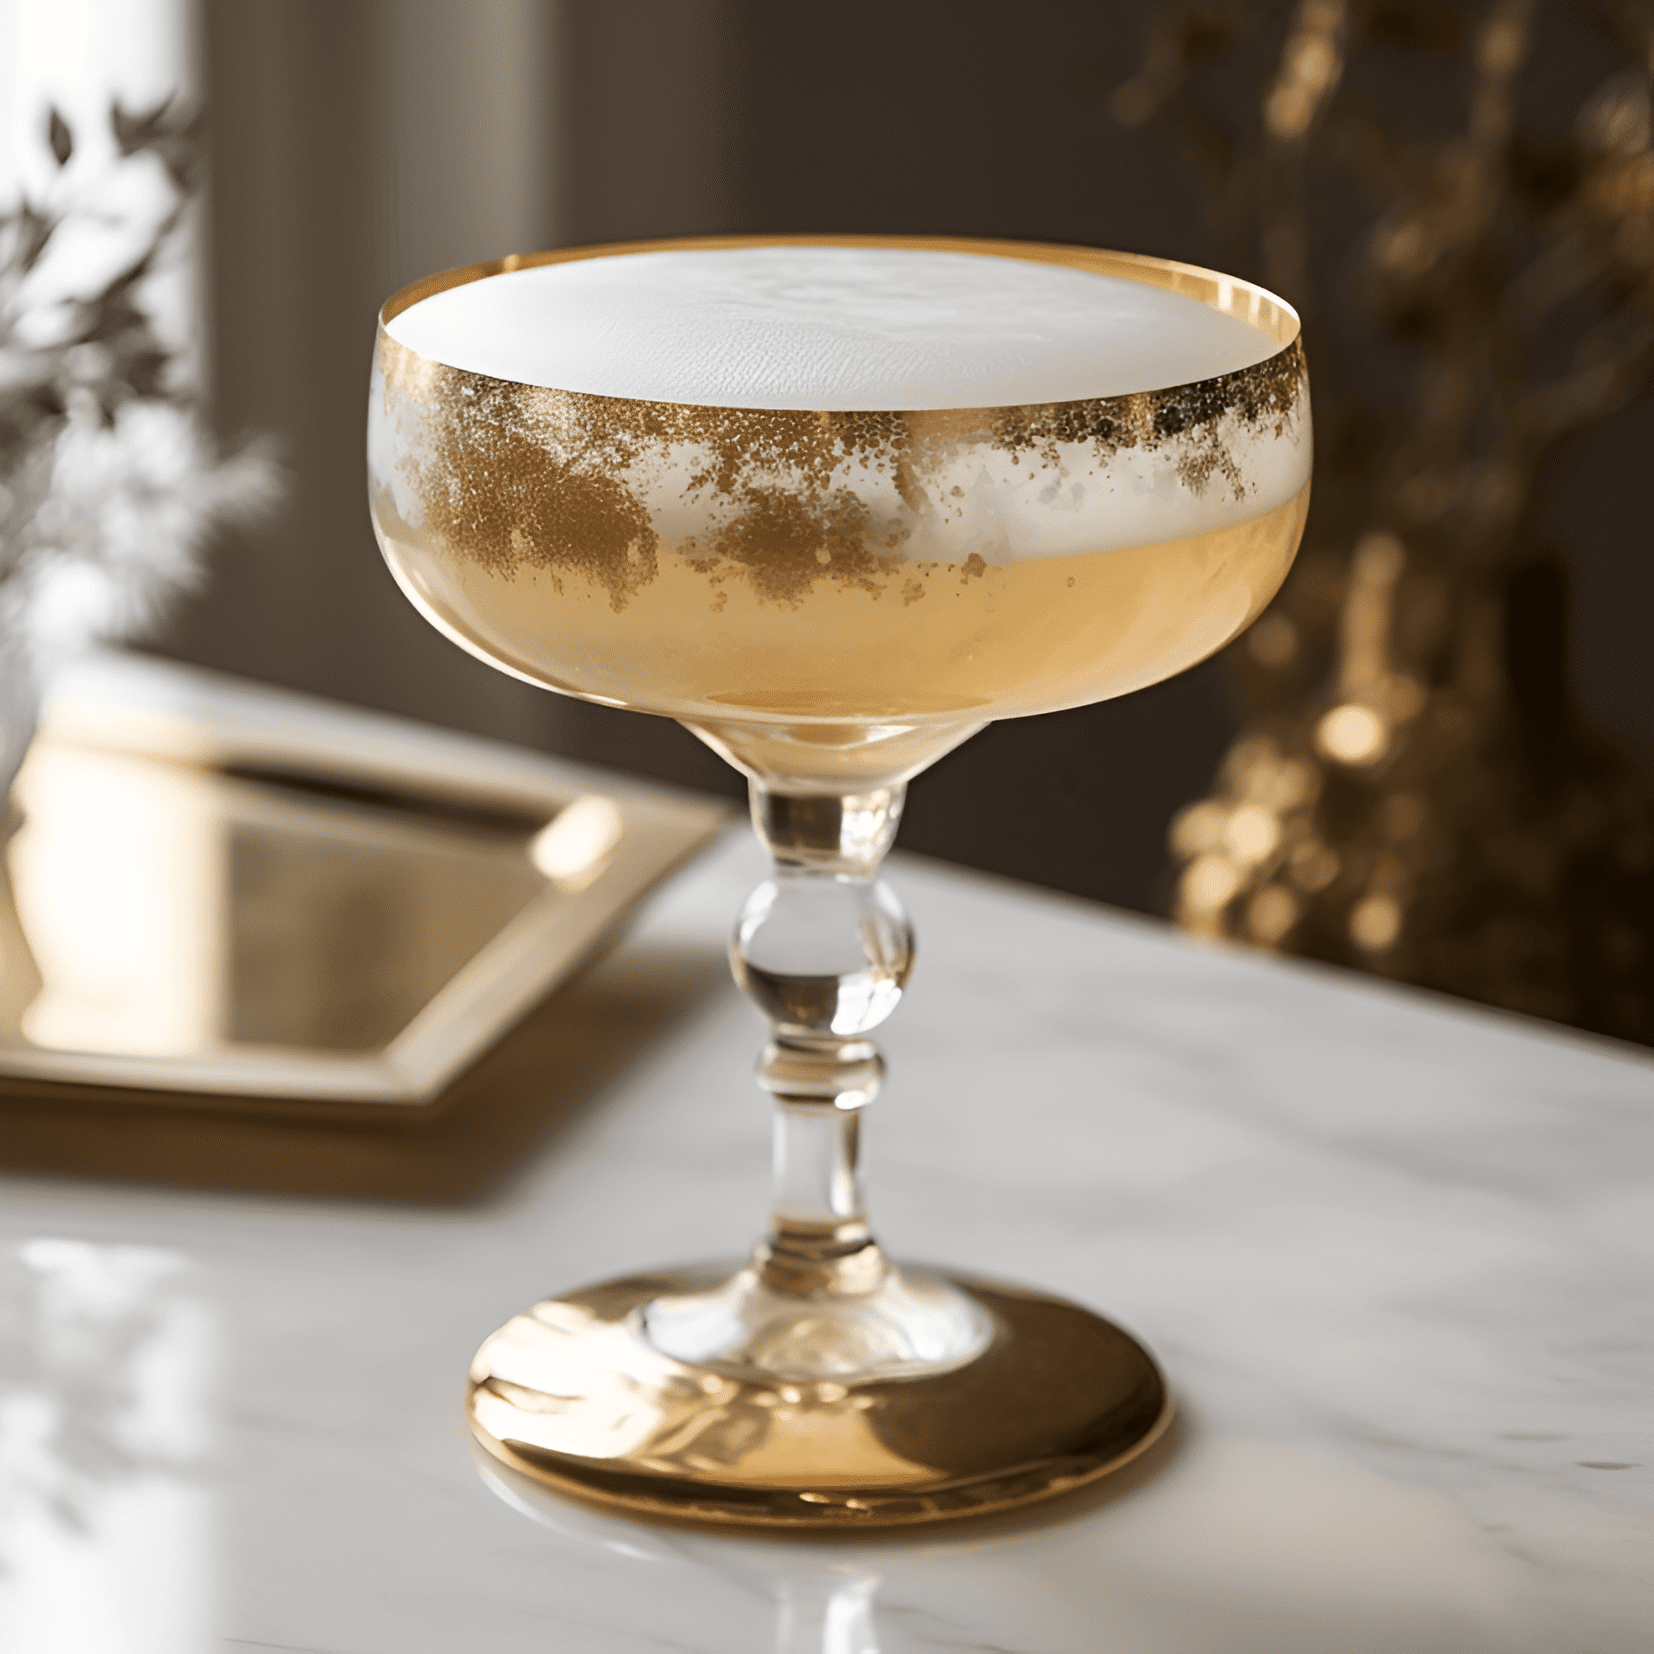 Heavenly Cocktail Recipe - The Heavenly cocktail is a harmonious blend of sweet, sour, and slightly bitter flavors. It has a velvety texture with a hint of effervescence, making it both refreshing and indulgent. The taste is rich and complex, with notes of citrus, vanilla, and a subtle herbal undertone.